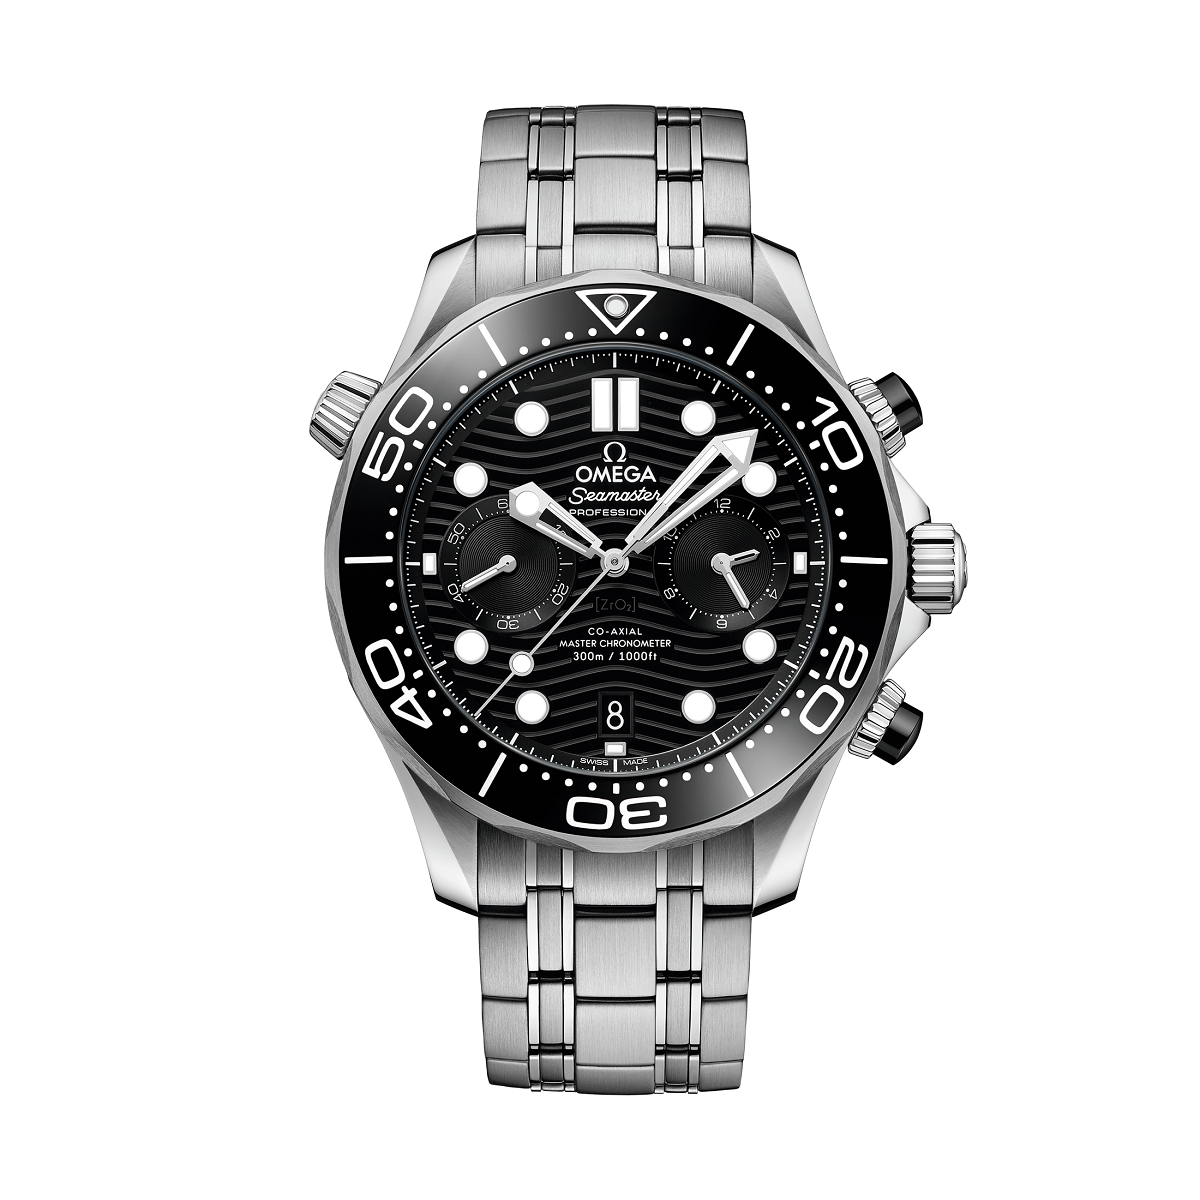 OMEGA SEAMASTER DIVER 300M CO-AXIAL MASTER CHRONOMETER CHRONOGRAPH 44 MM - 210.30.44.51.01.001